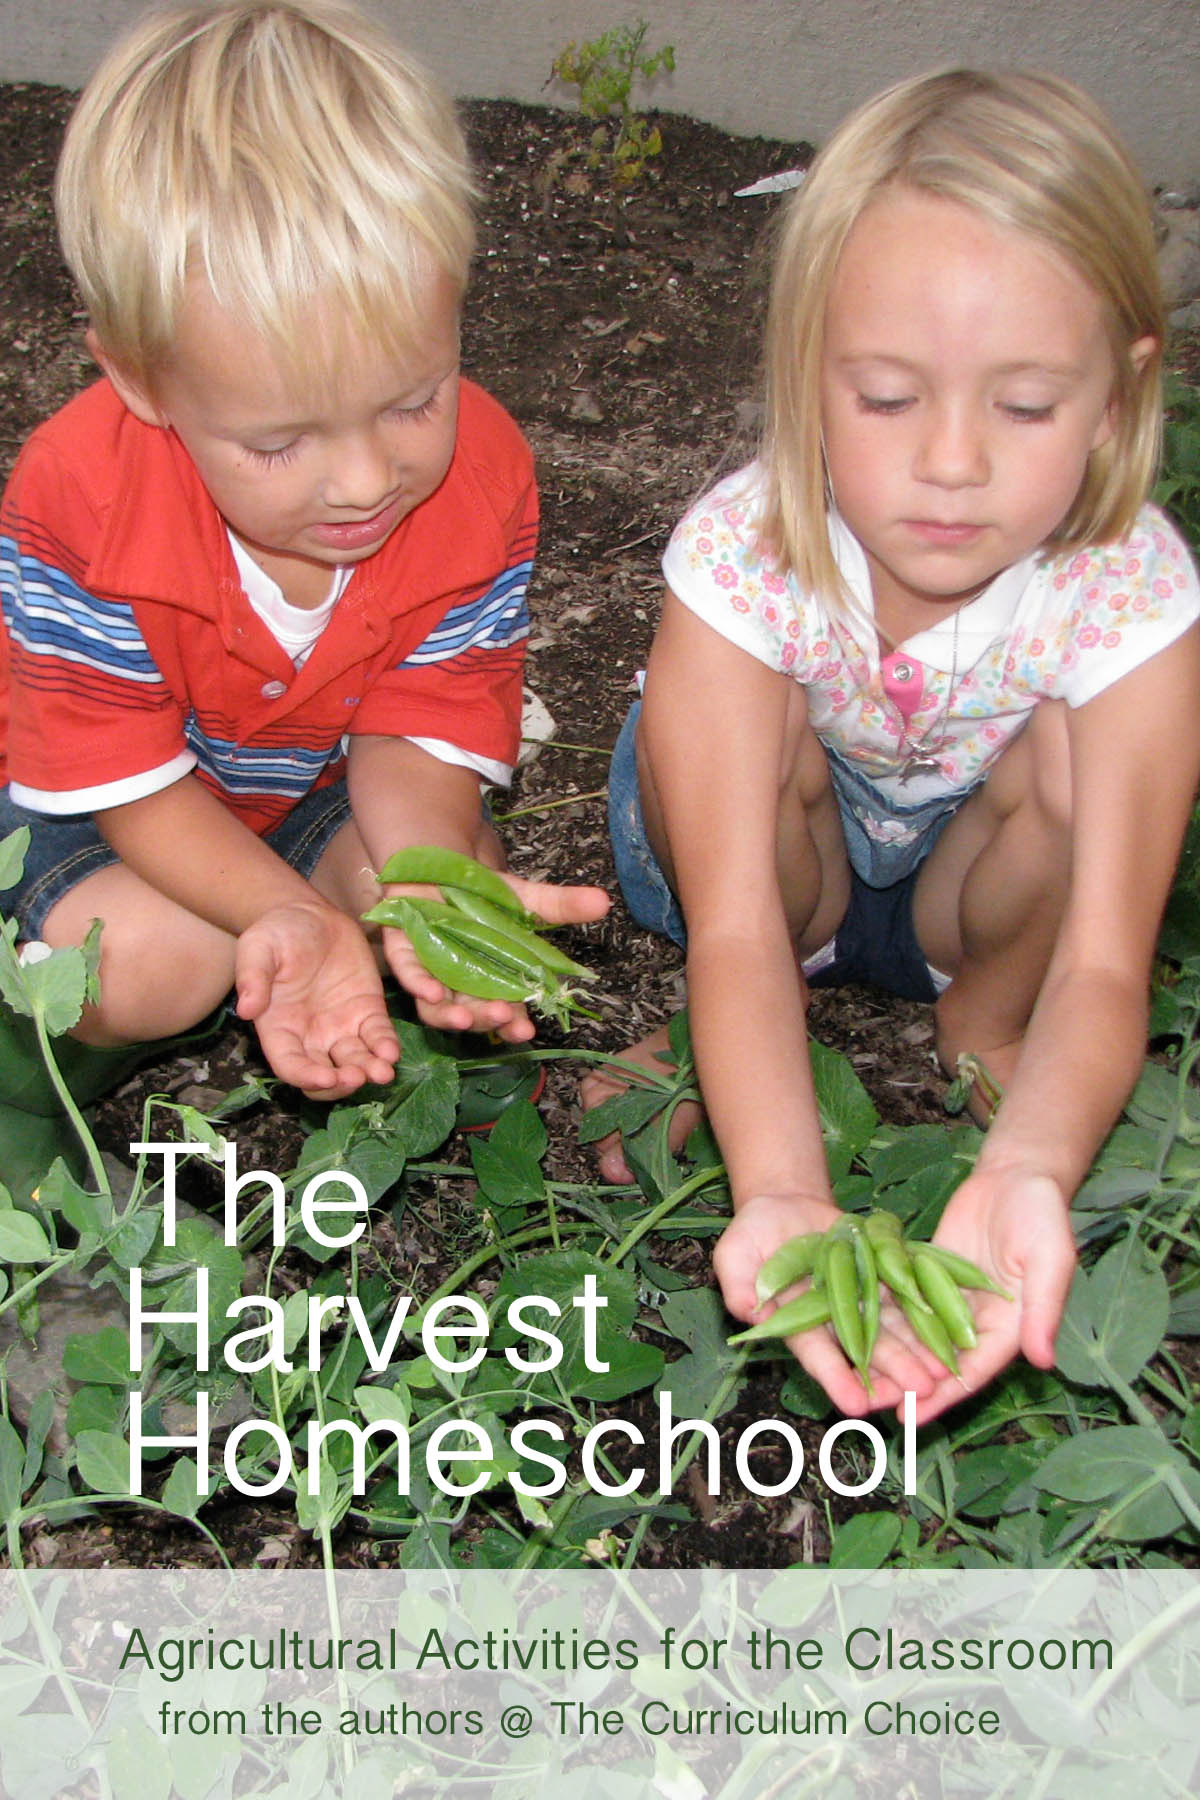 The Harvest Homeschool: Agricultural Activities for the Classroom